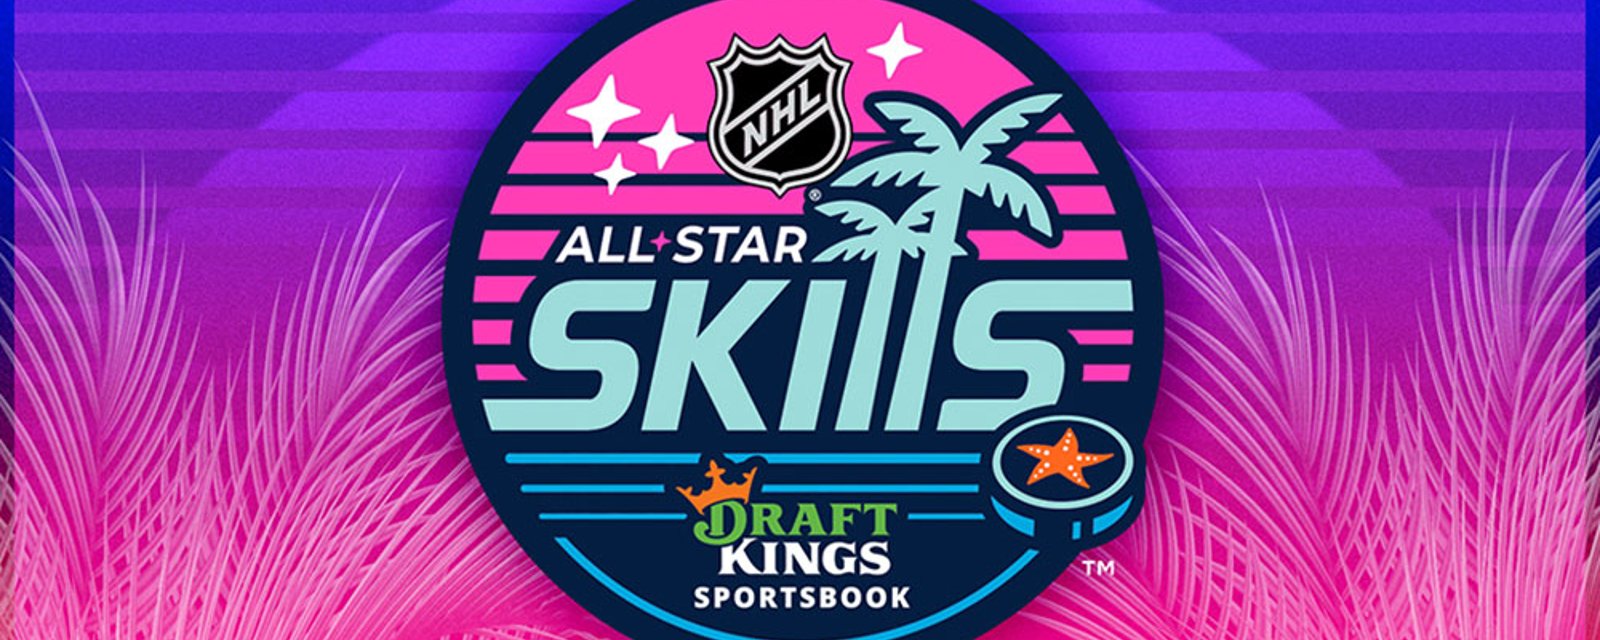 NHL reveals All-Star skills competitions including a golf-inspired “Pitch n' Puck”